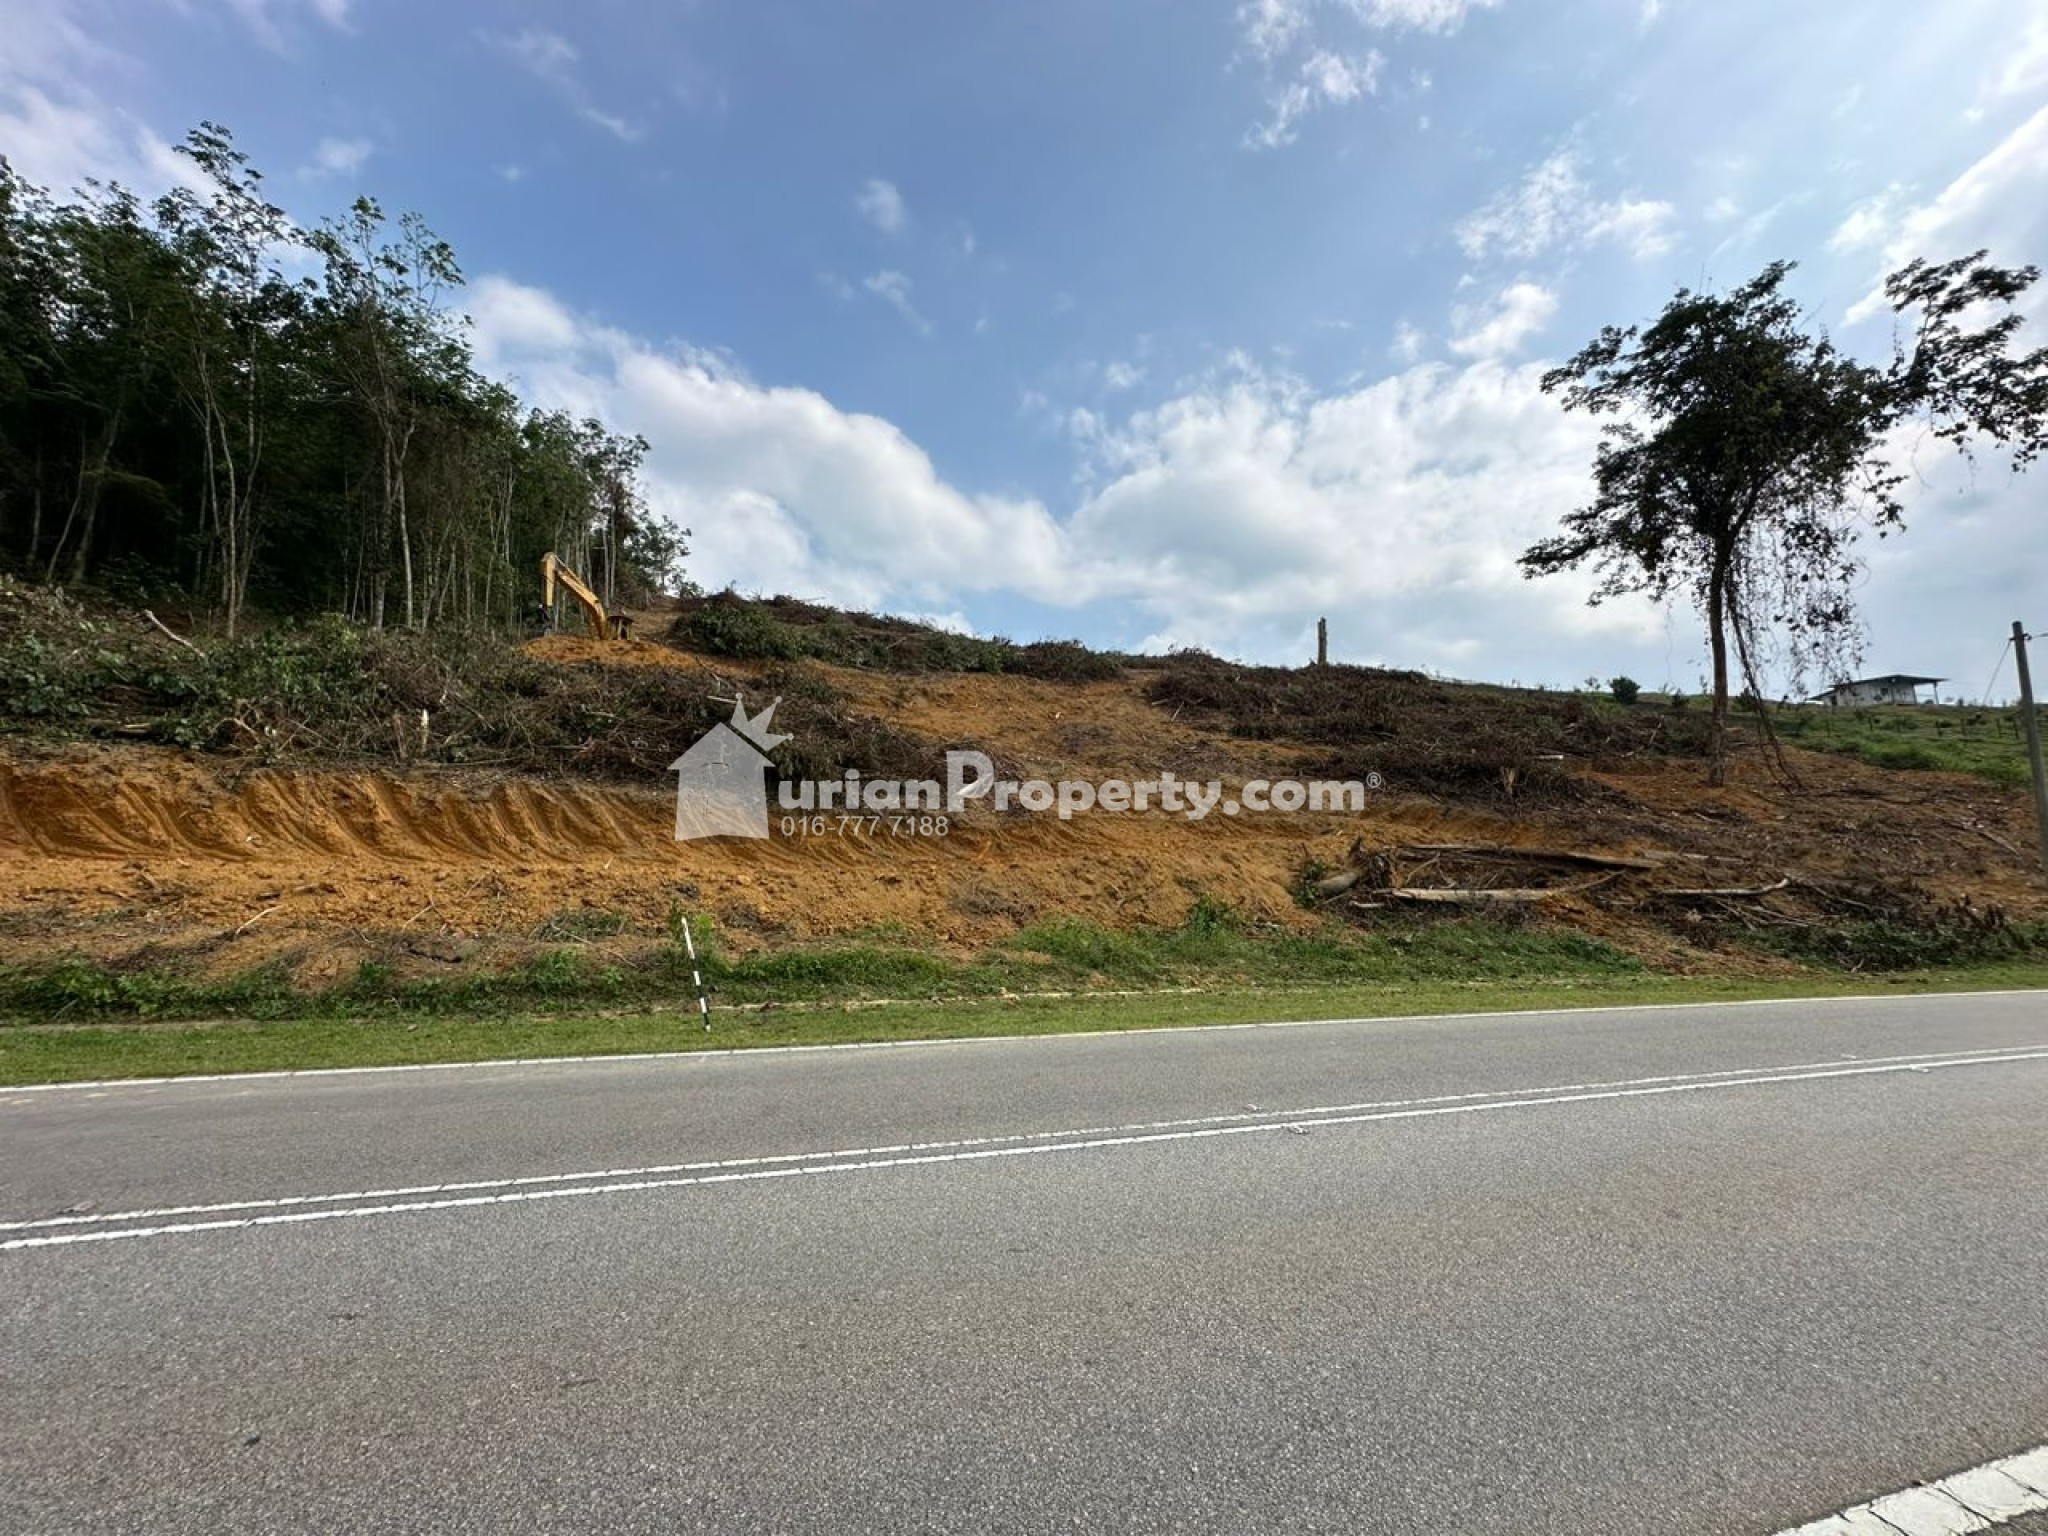 Agriculture Land For Sale at Kuala Pilah